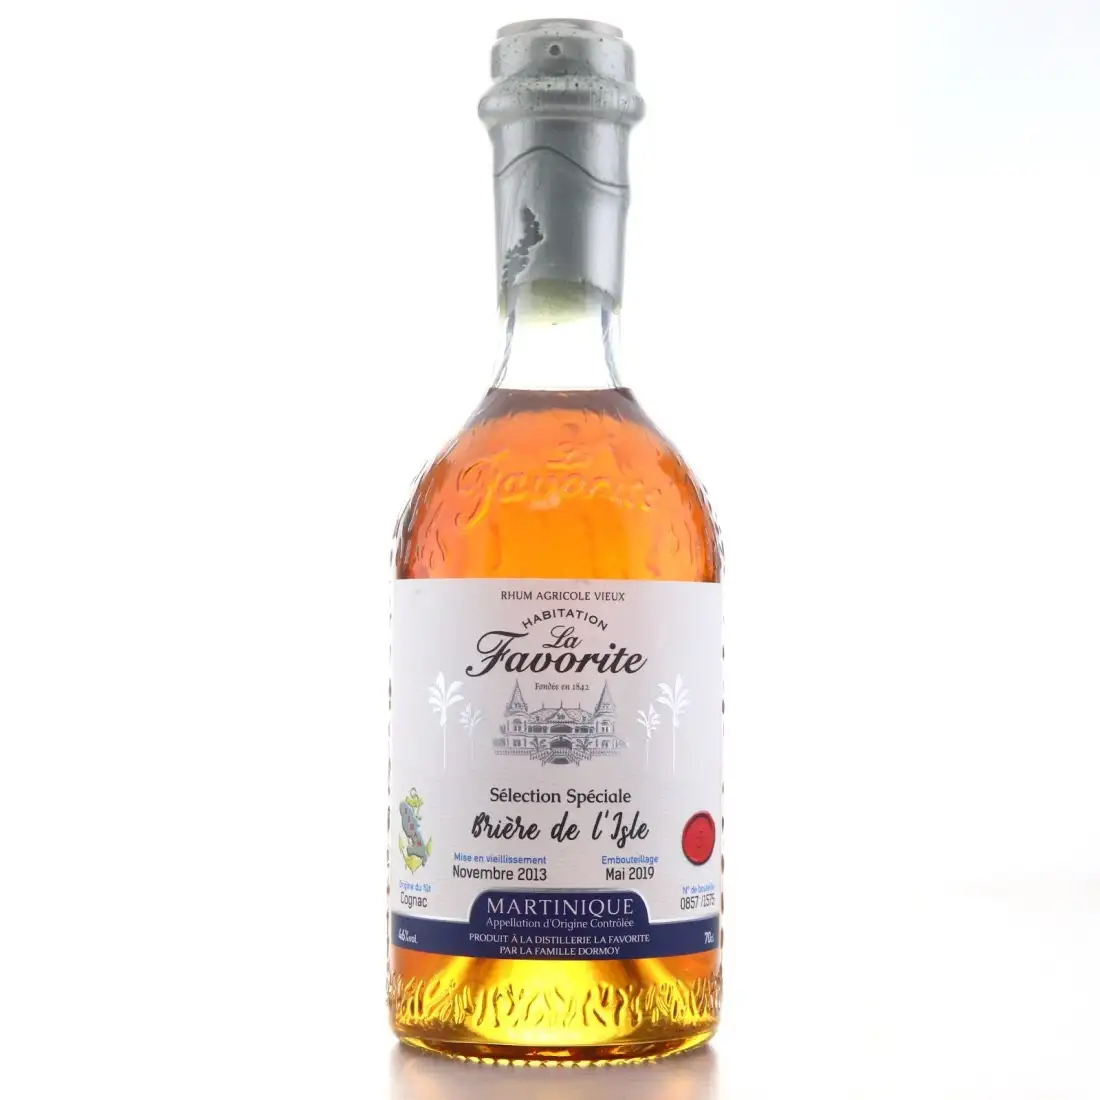 Image of the front of the bottle of the rum Brière de L'Isle